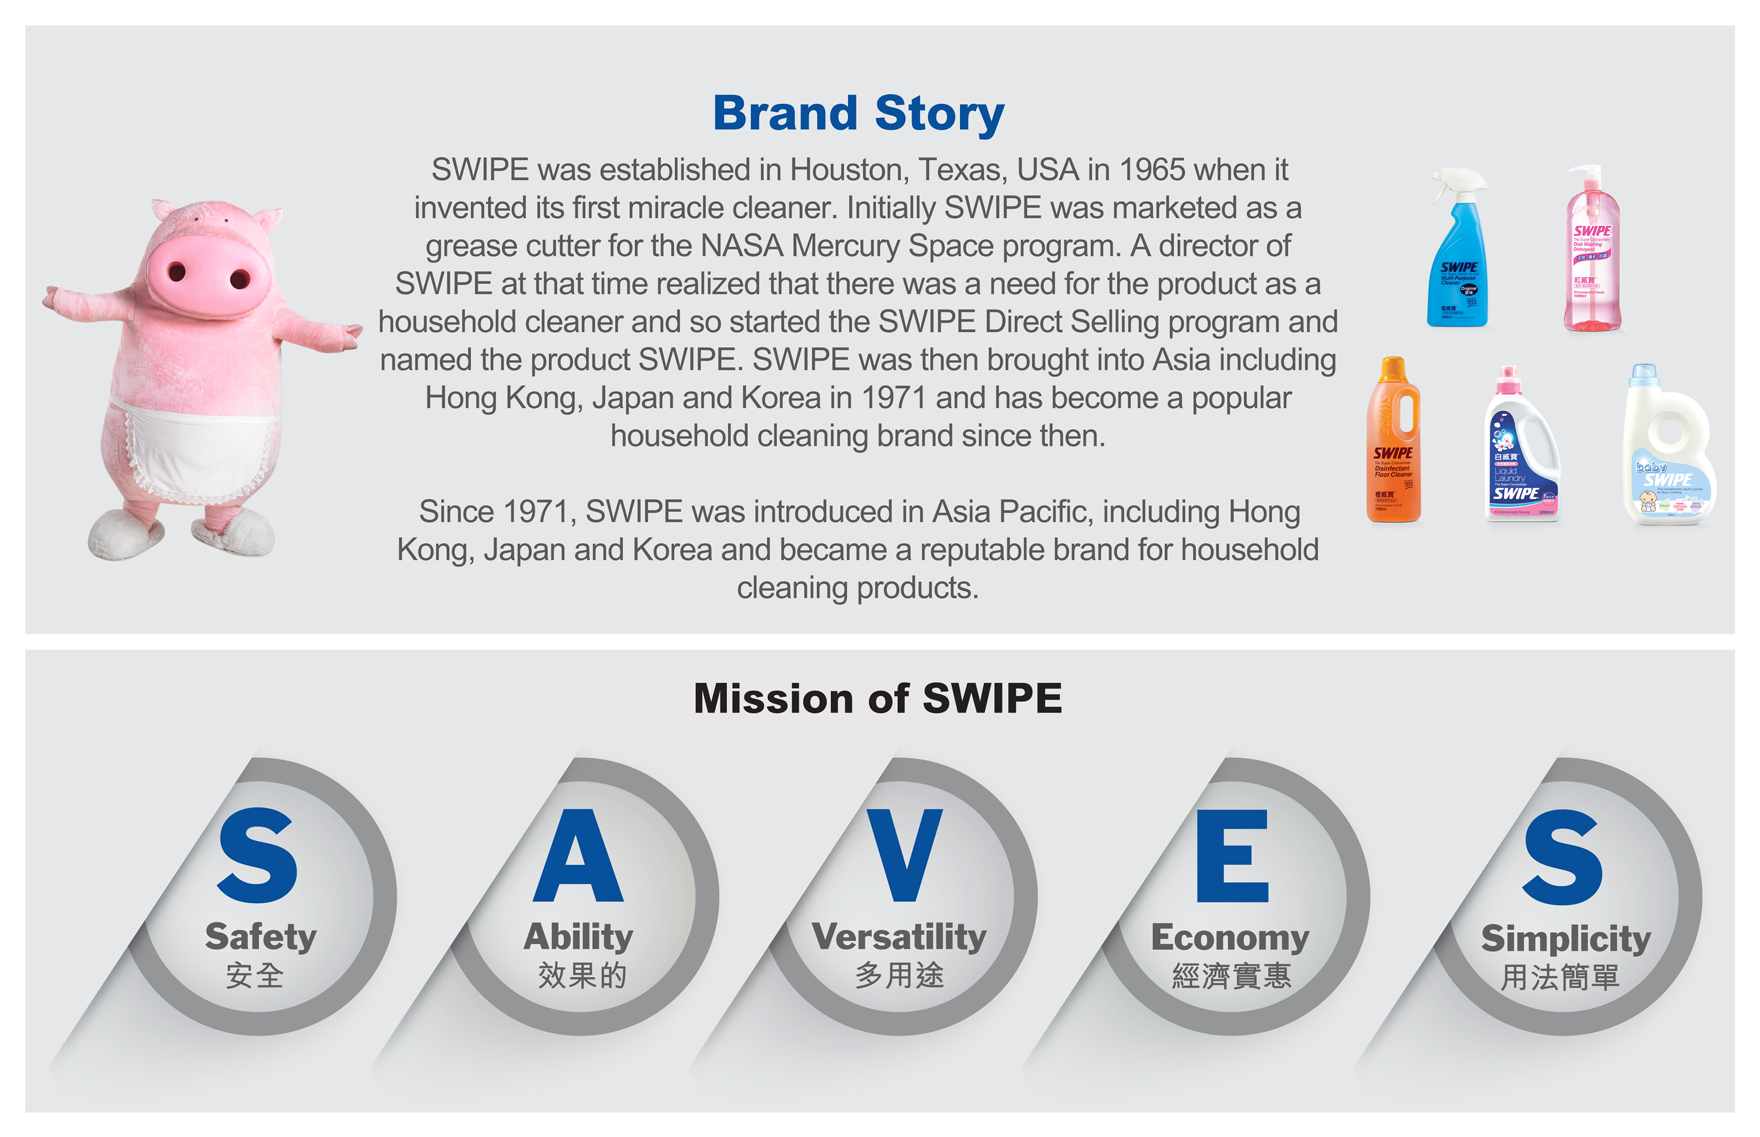 SWIPE Brand Story and Mission